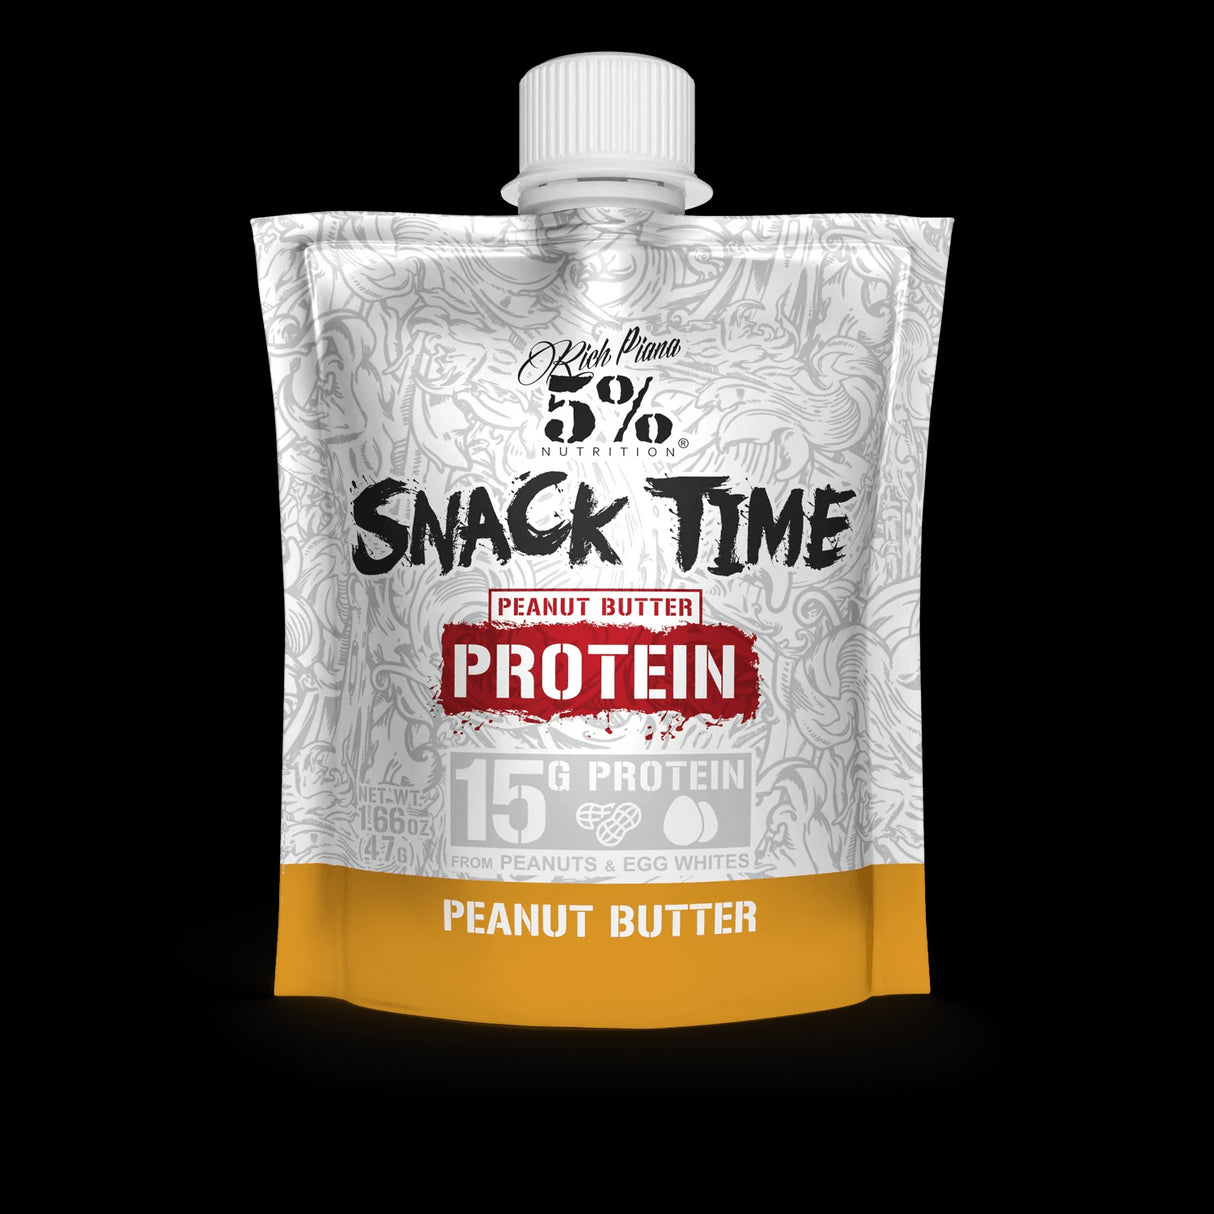 Snack Time Protein - Peanut Butter- 5% Nutrition - Prime Sports Nutrition